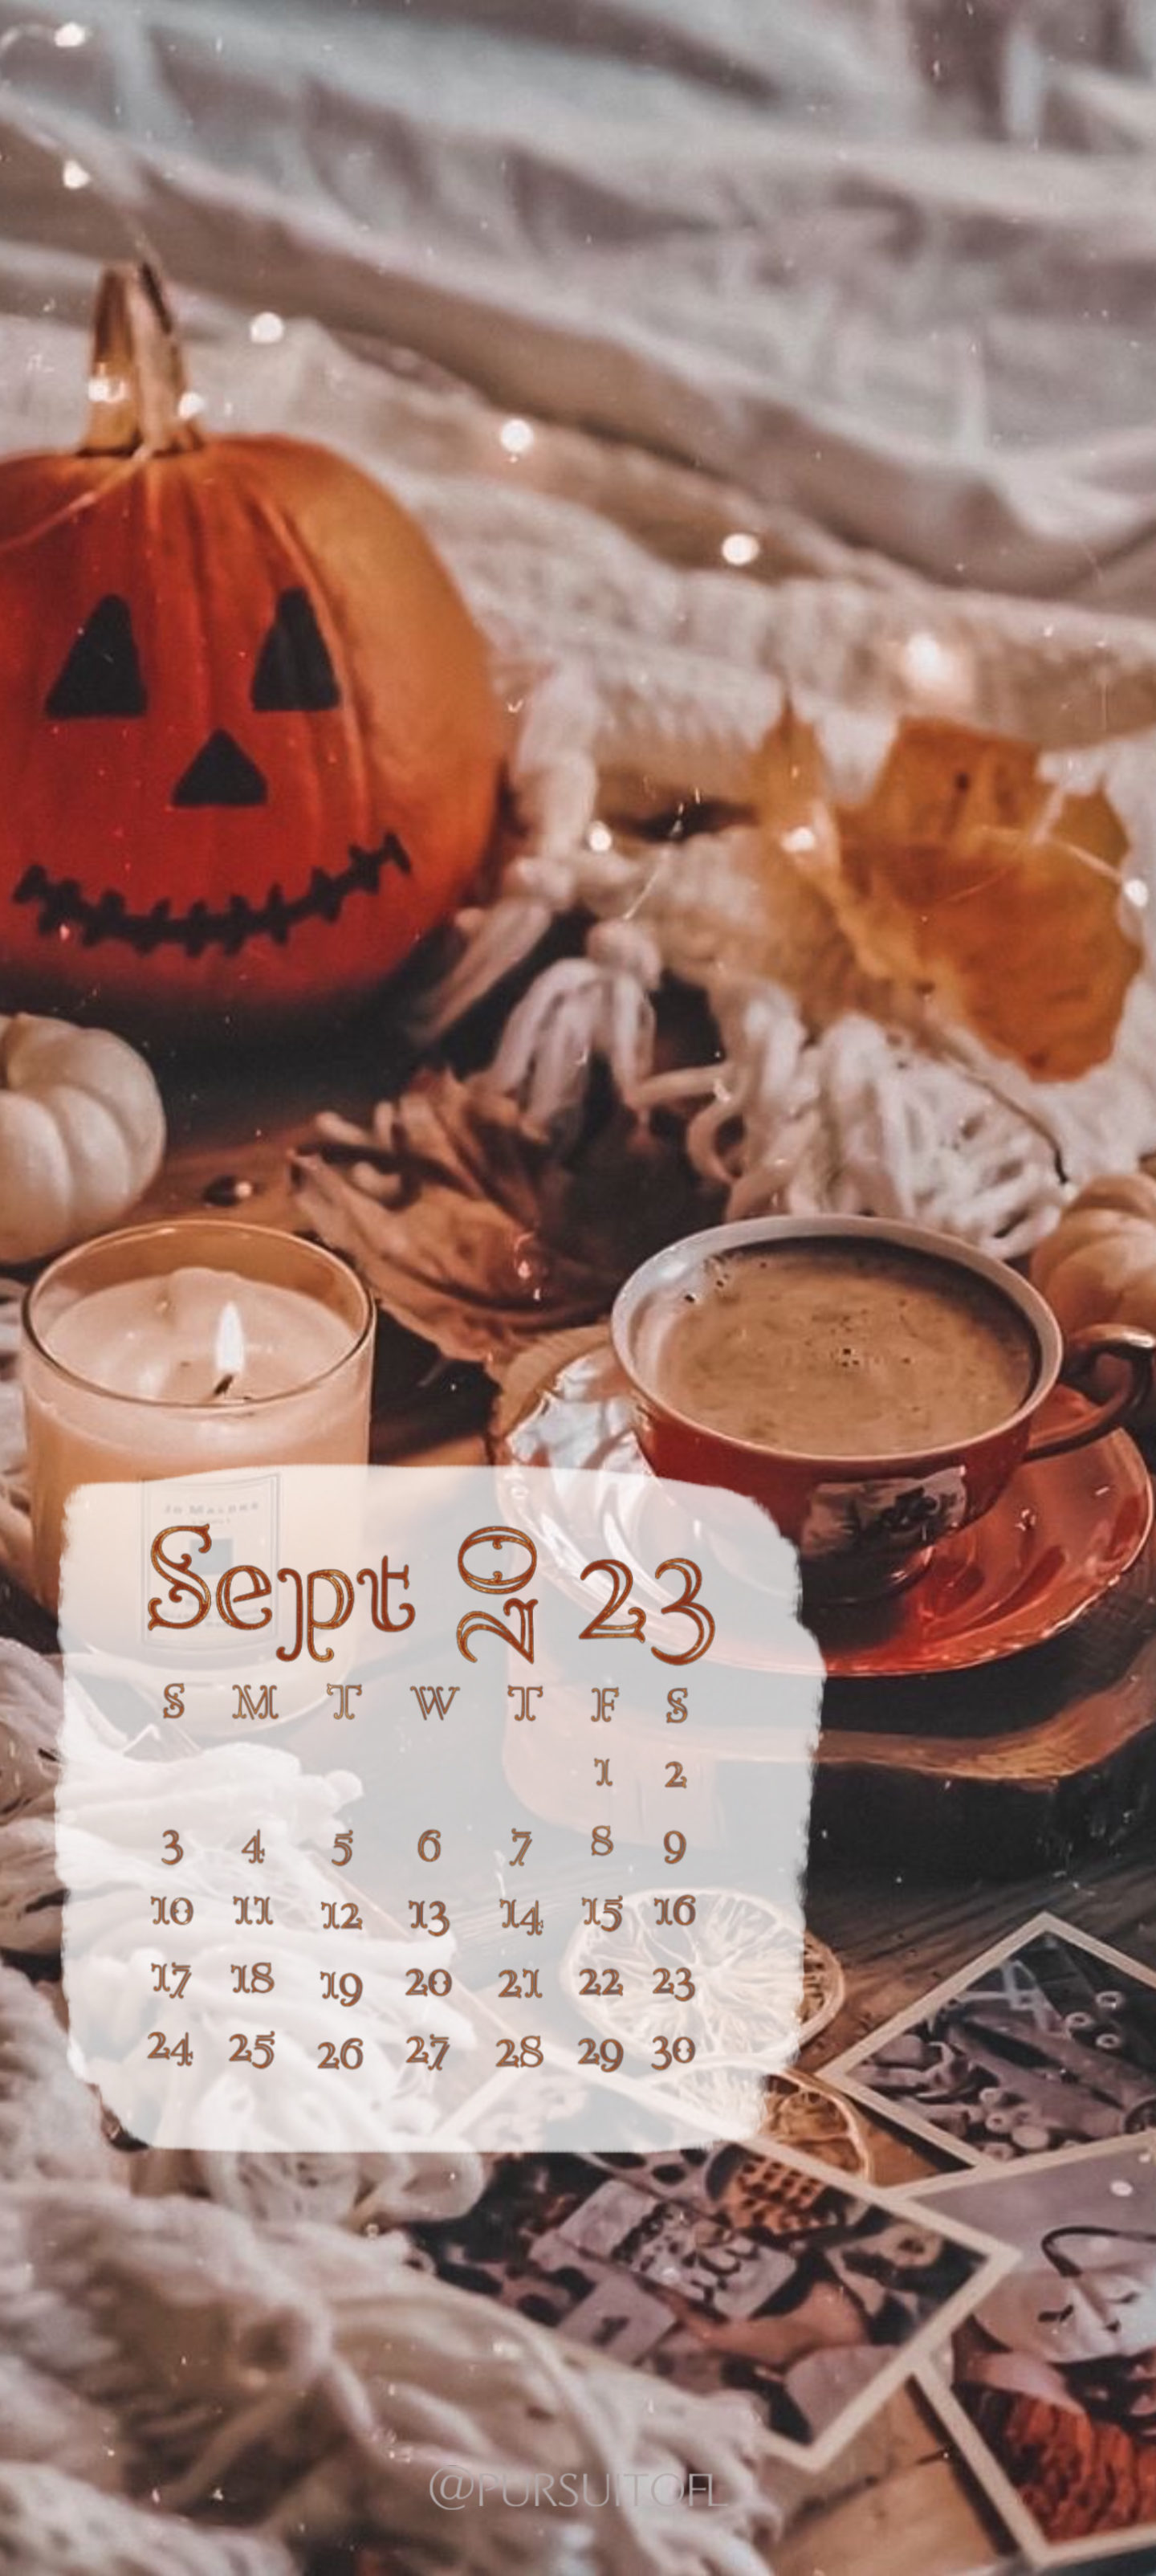 Phone wallpaper with cozy fall setting with candle, warm drink, fairy lights, pumpkin on a bed, and September 2023 calendar